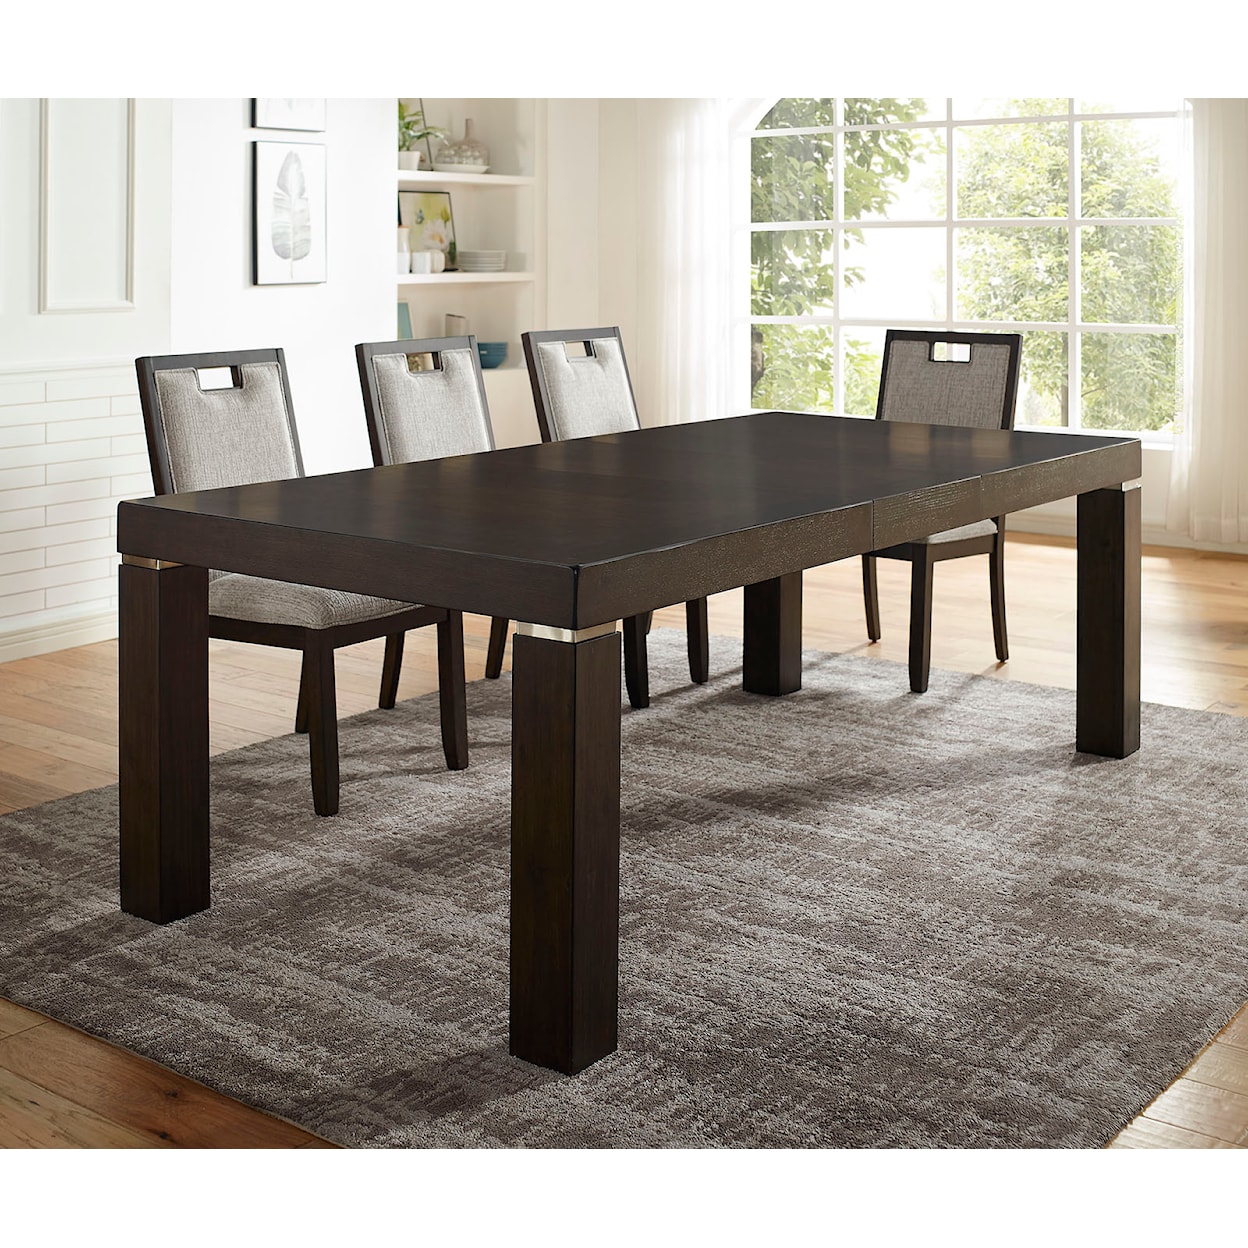 FUSA Caterina Dining Table